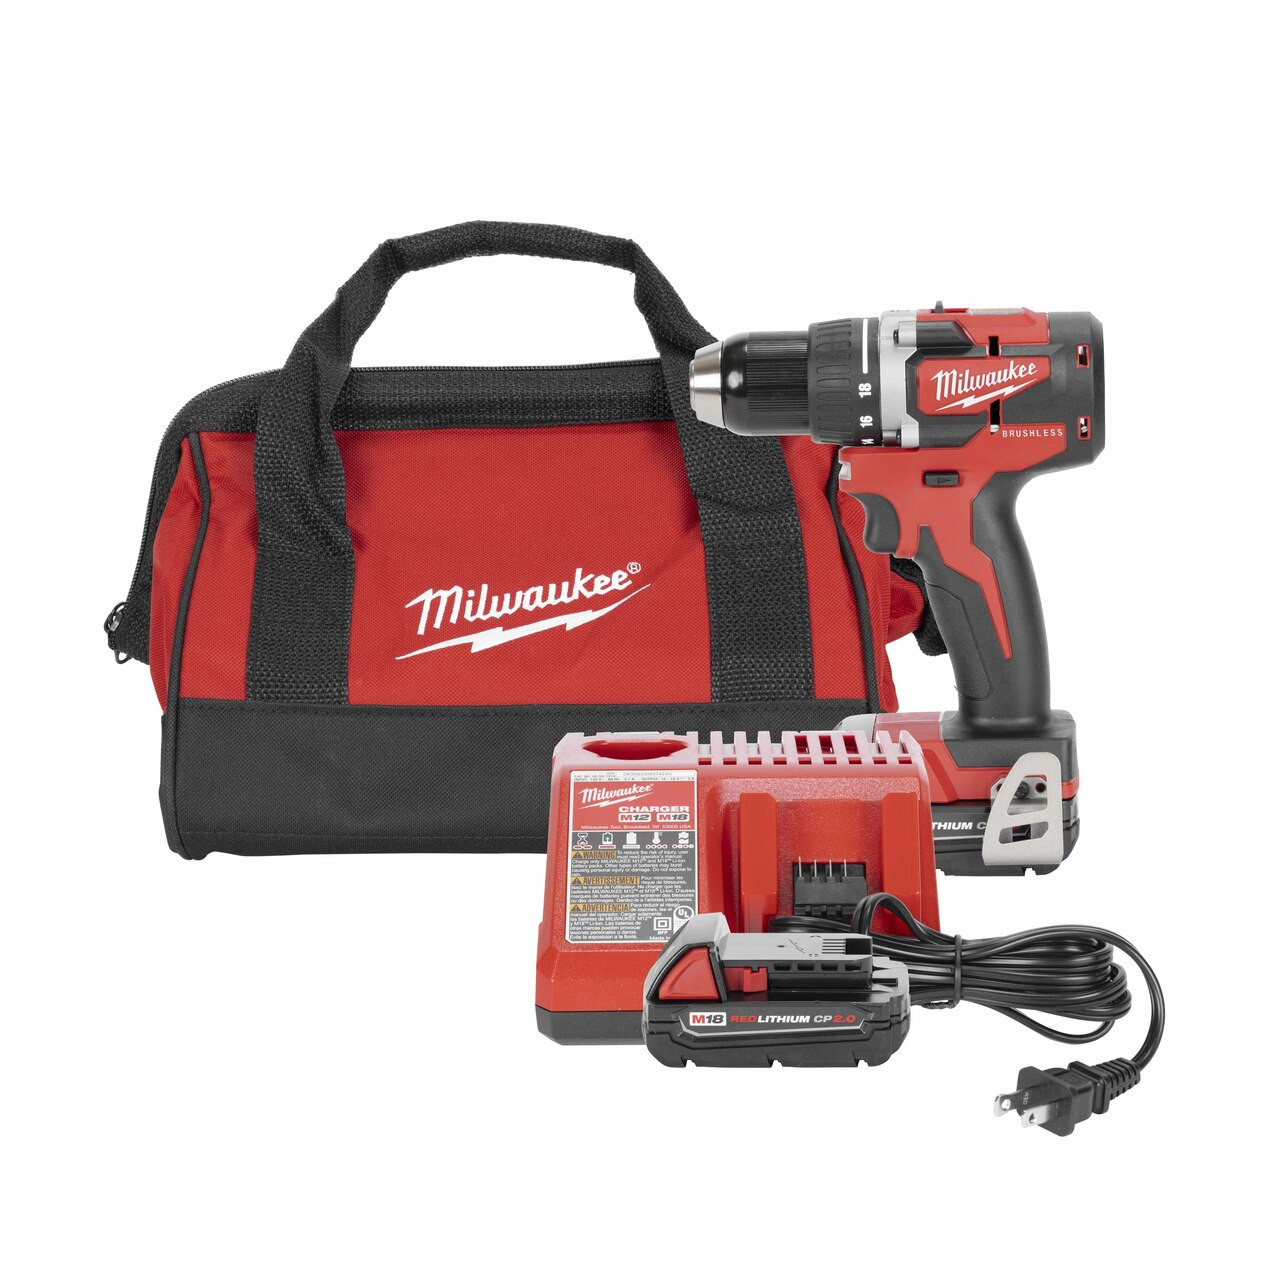 Milwaukee M18 Drill Driver 1/2” Chuck 18V Batteries Charger Case  (2801-22CT) JB Tools